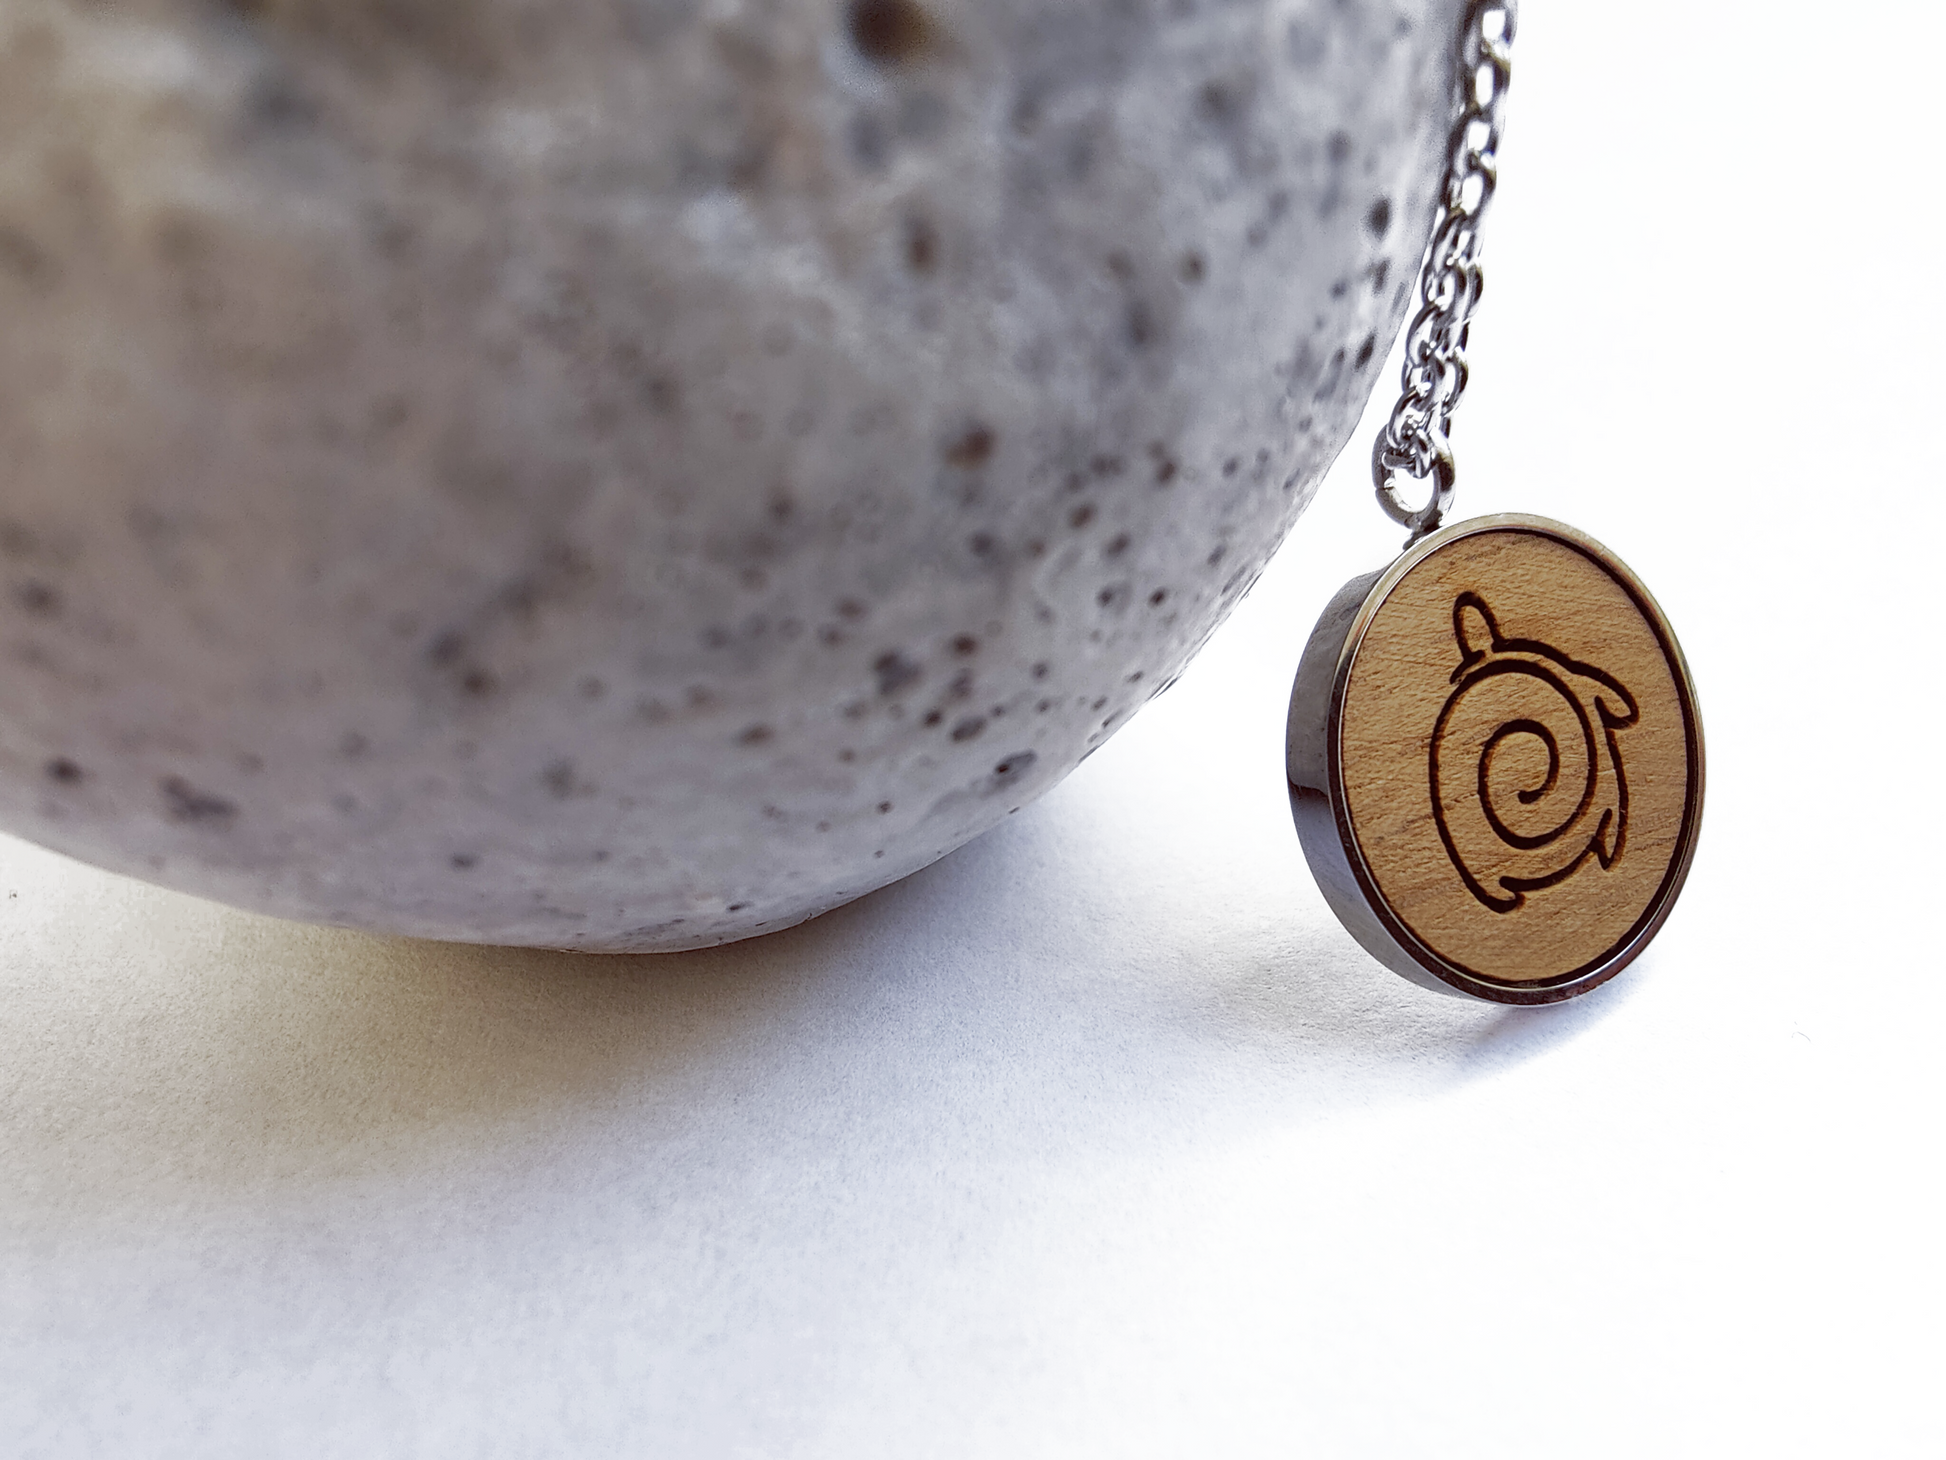 Nut wood turtle pendant necklace with stainless steel chain. All our eco-friendly necklaces are delivered in FSC certified jewelry boxes with sustainable foam.